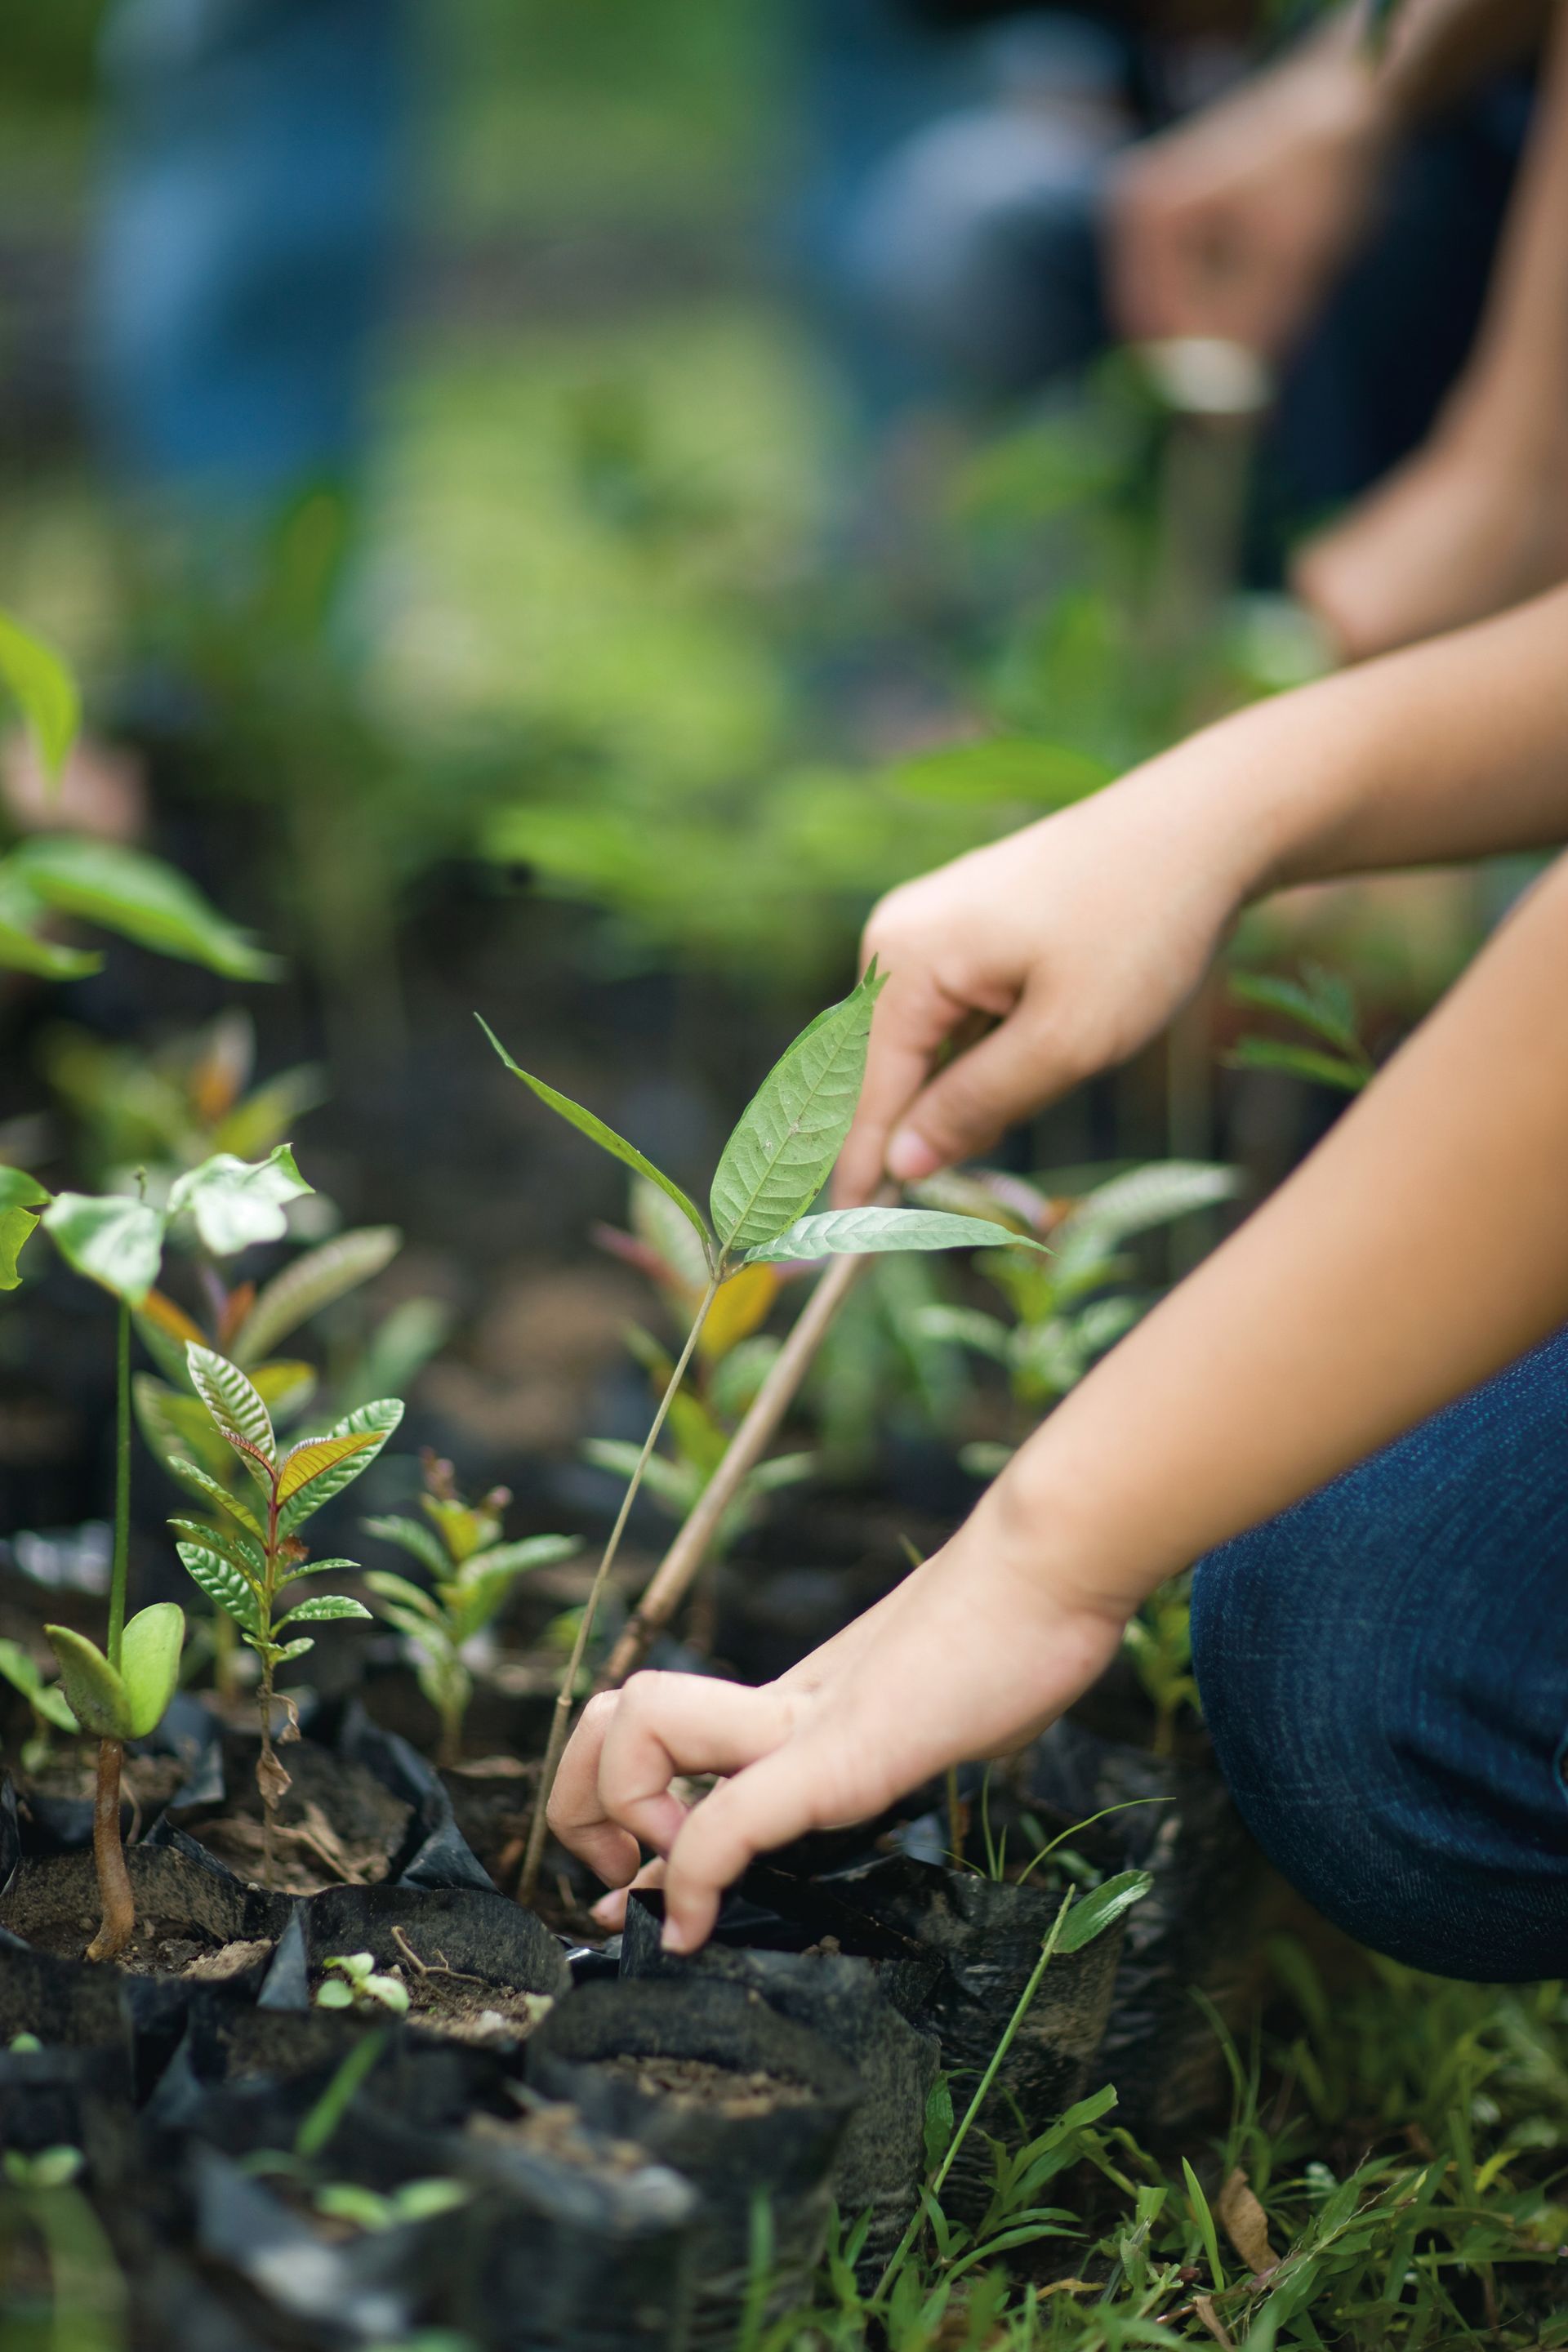 Hands are seen planting seeds in a garden.